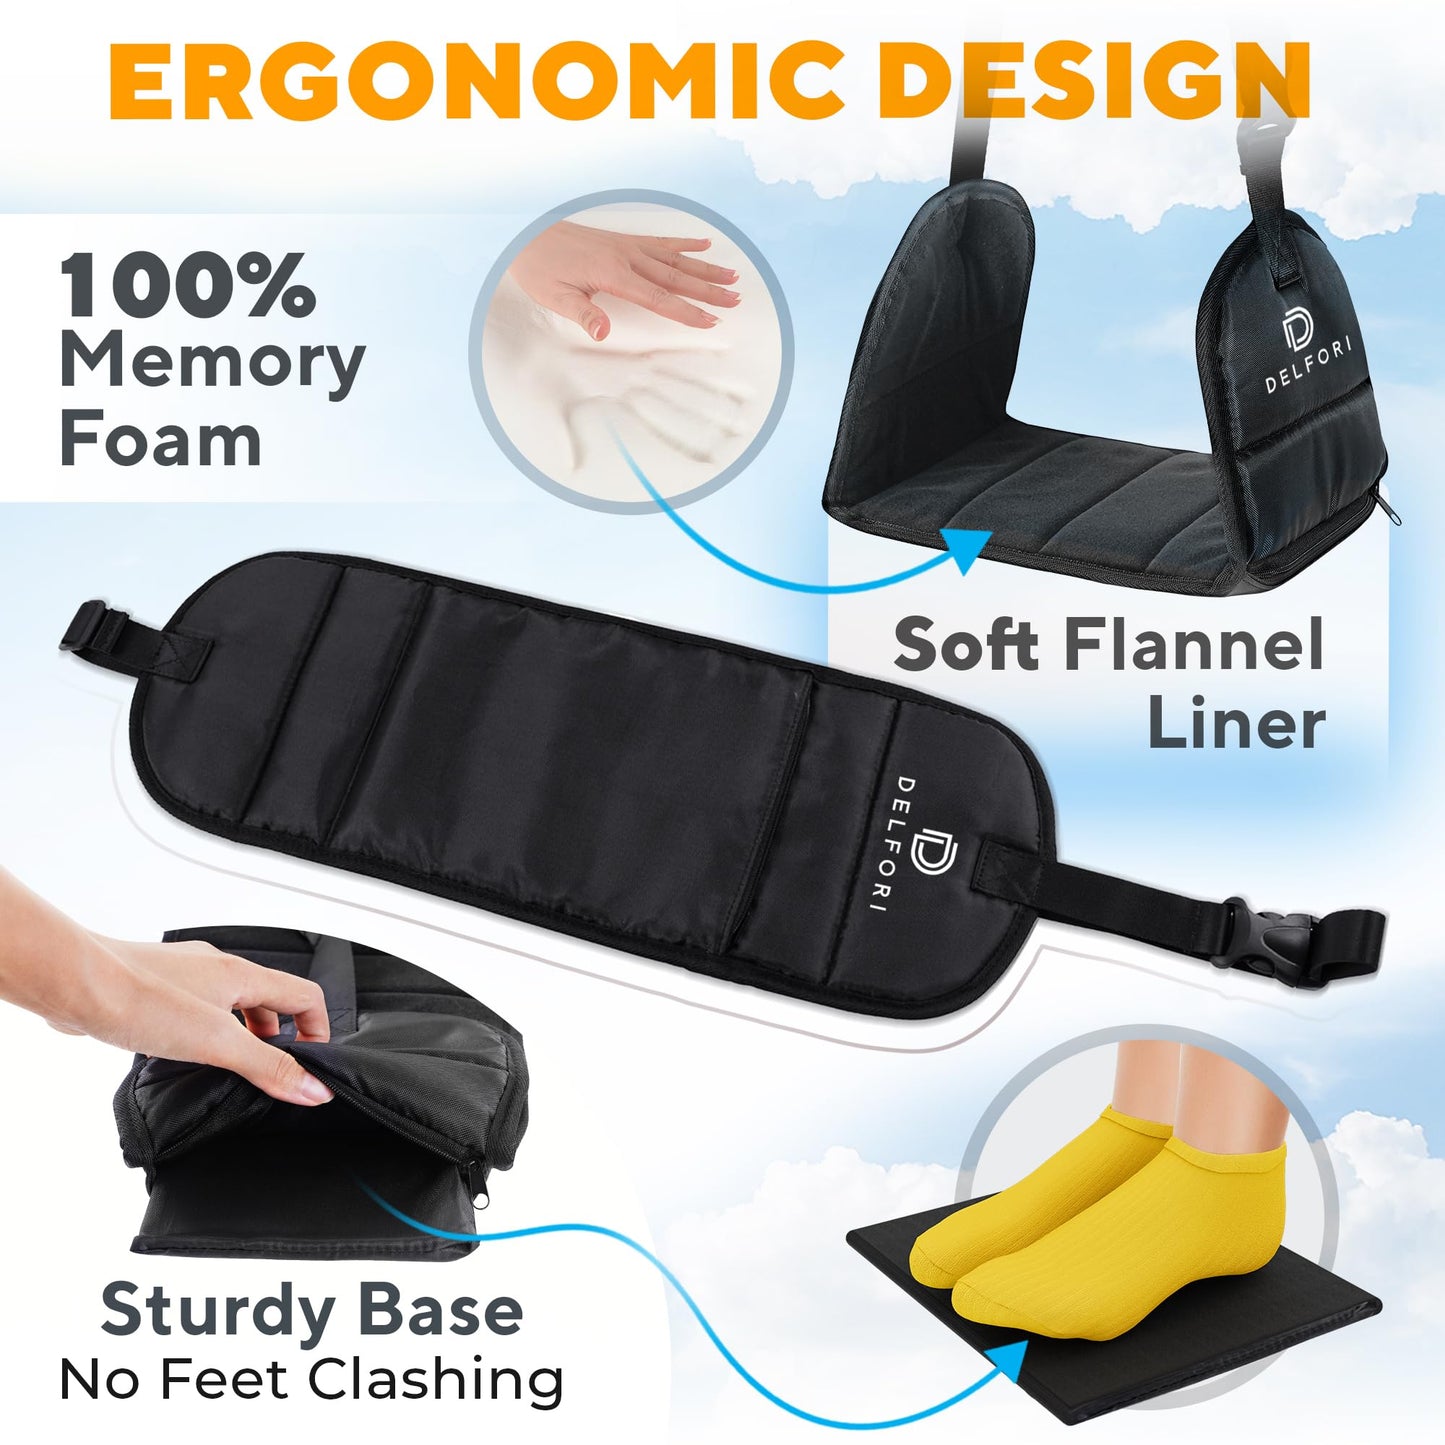 Portable Airplane Footrest for Airplane Travel - Comfortable Foot Hammock w/Memory Foam & Hardboard for No Feet Clashing - Ideal for Pain and Swelling Relief - Travel Essentials to Relax Your Feet